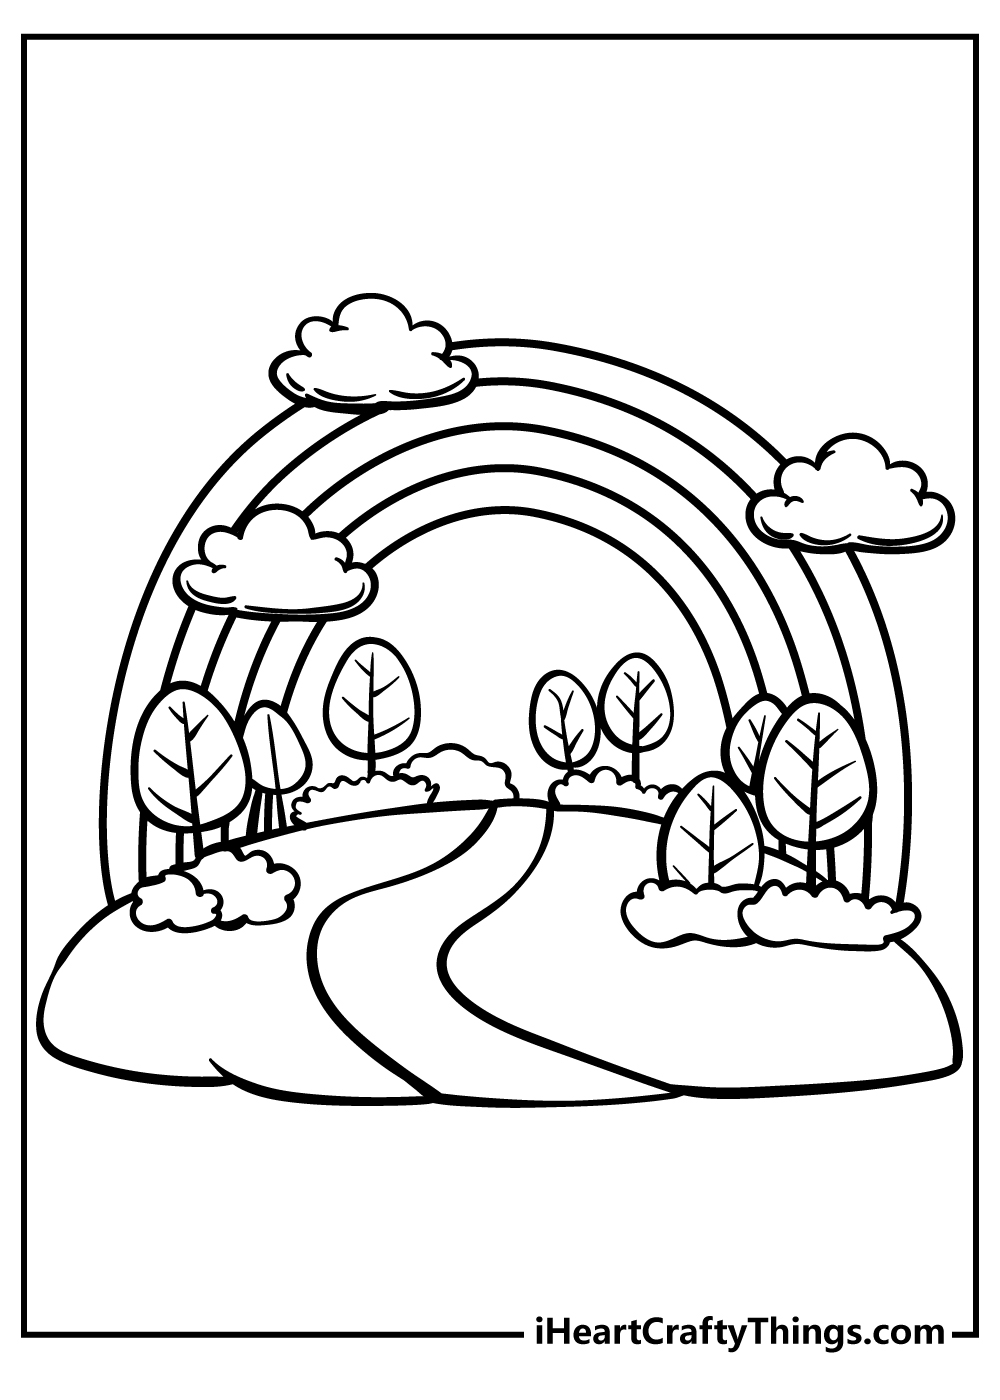 Rainbow coloring pages free printable